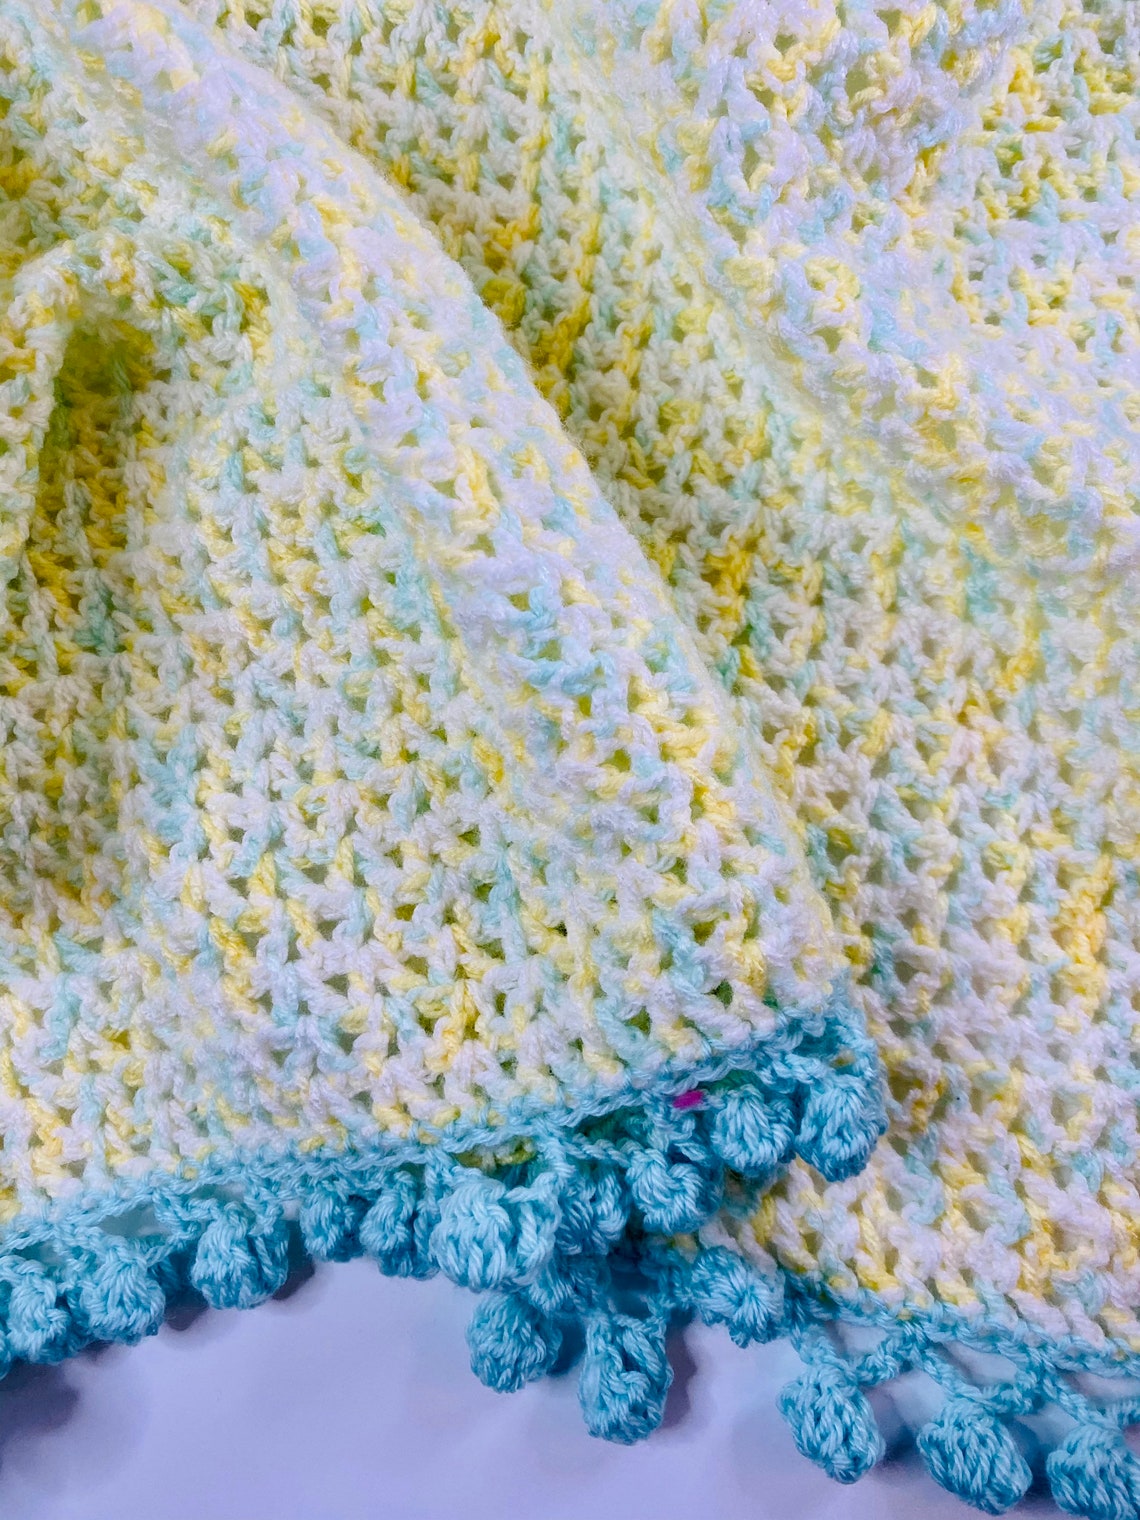 Crochet Teal and Yellow Baby Blanket | Etsy